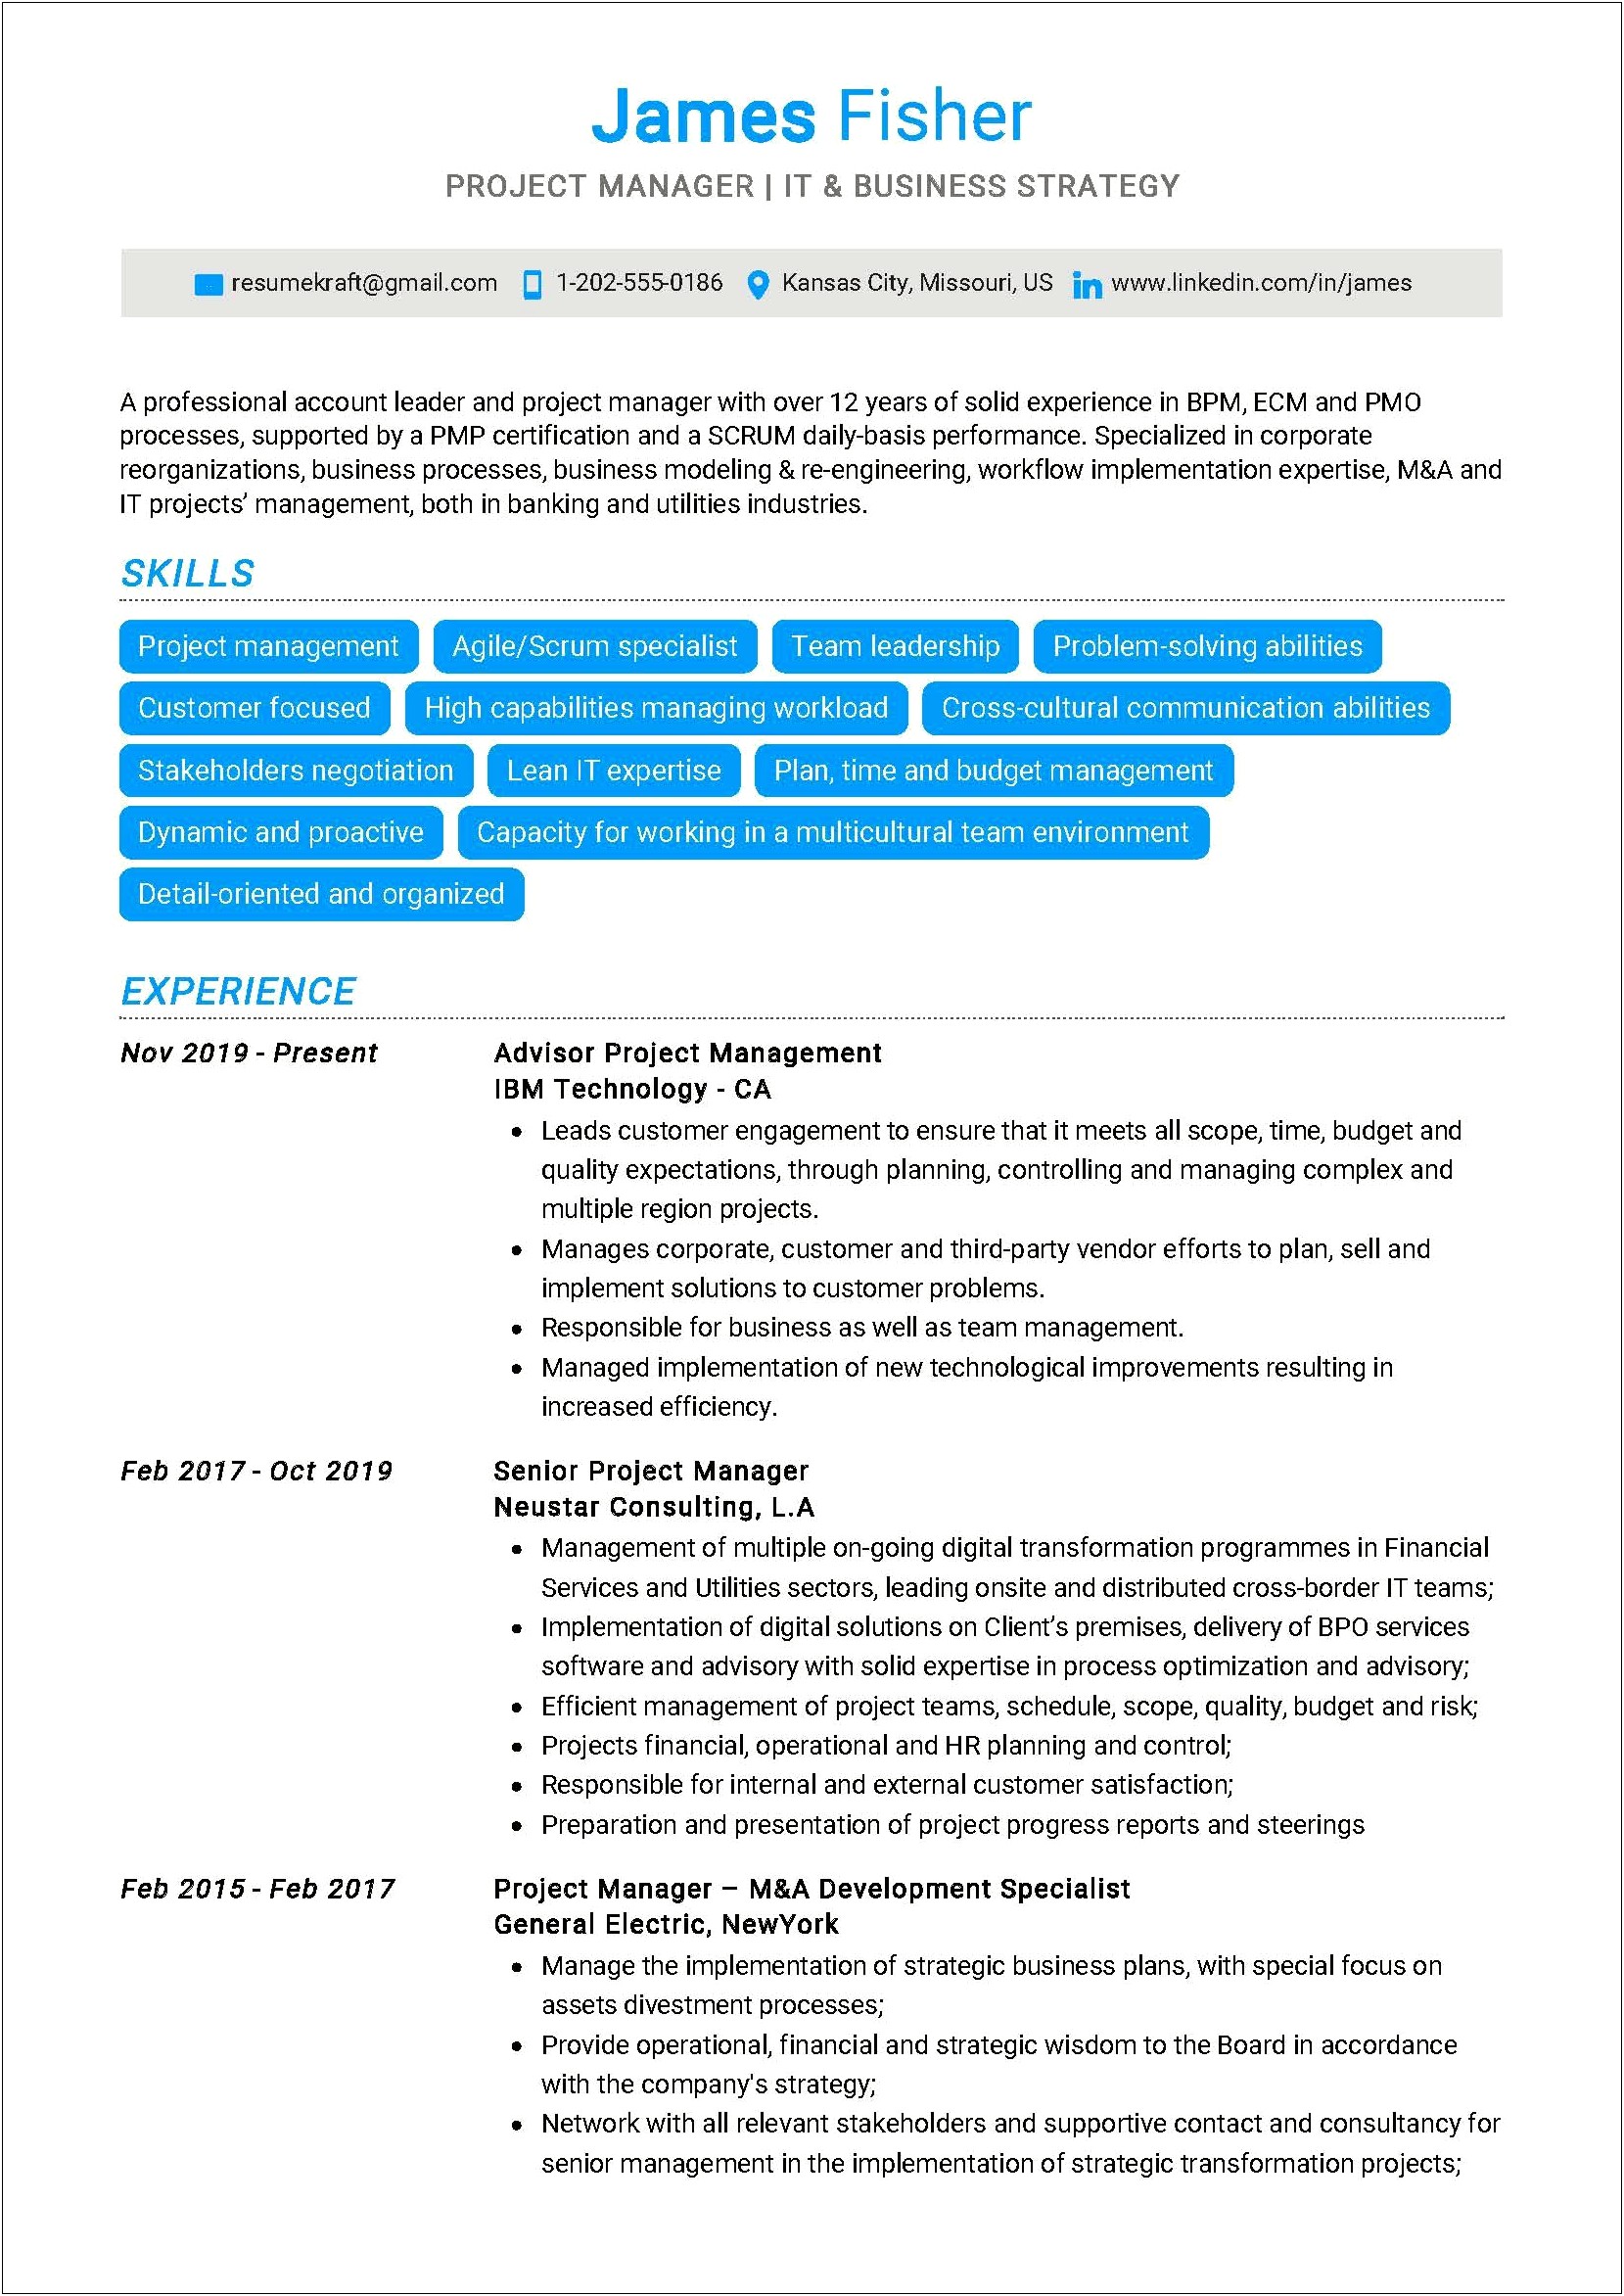 Project Manager Resume Write Up